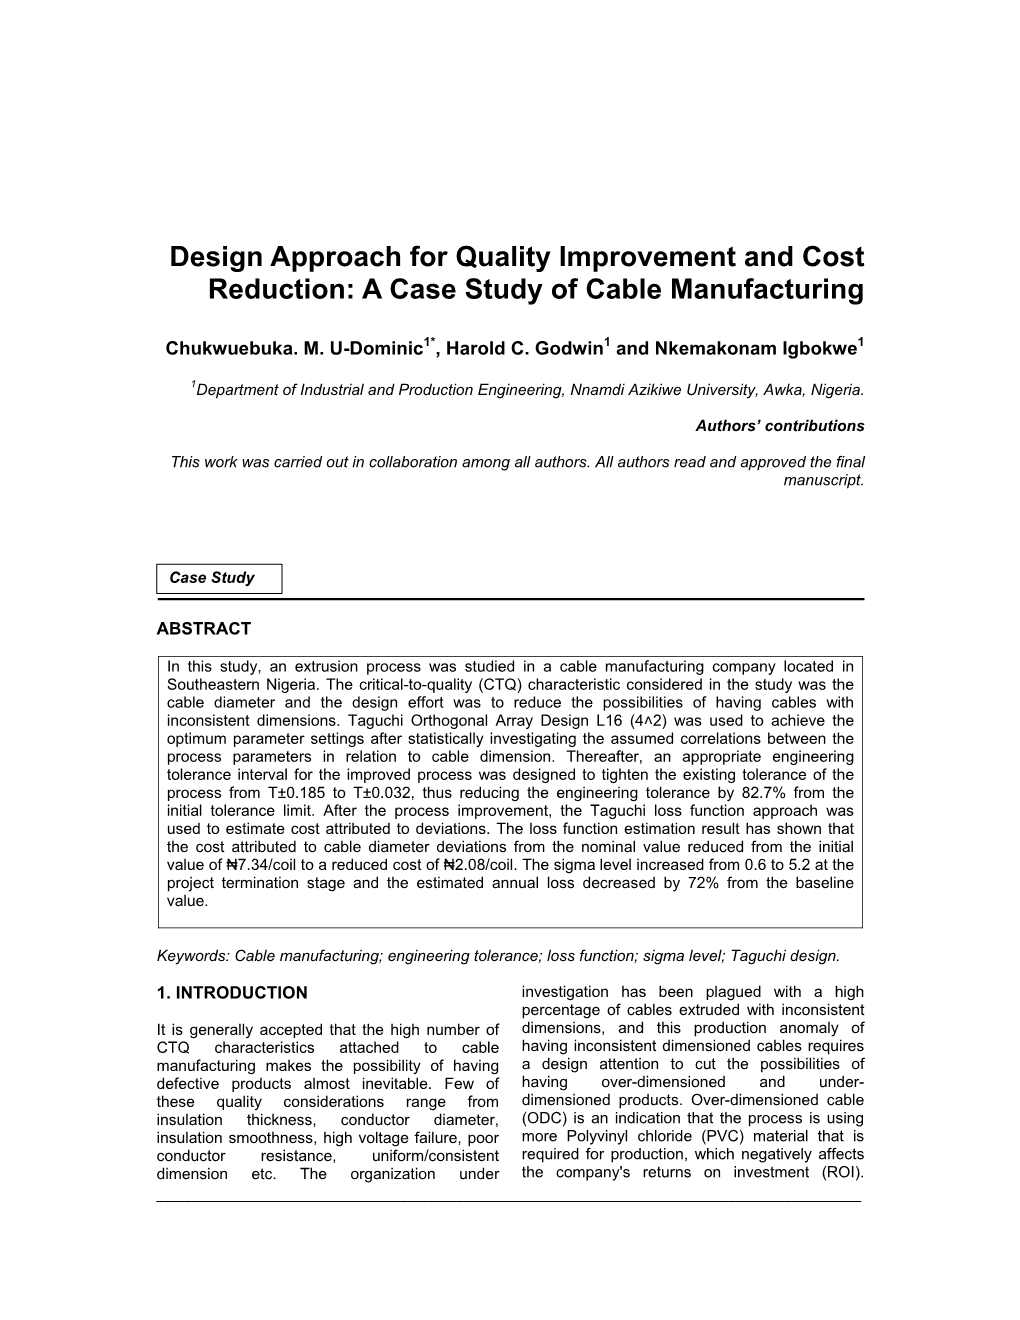 Design Approach for Quality Improvement and Cost Reduction: a Case Study of Cable Manufacturing